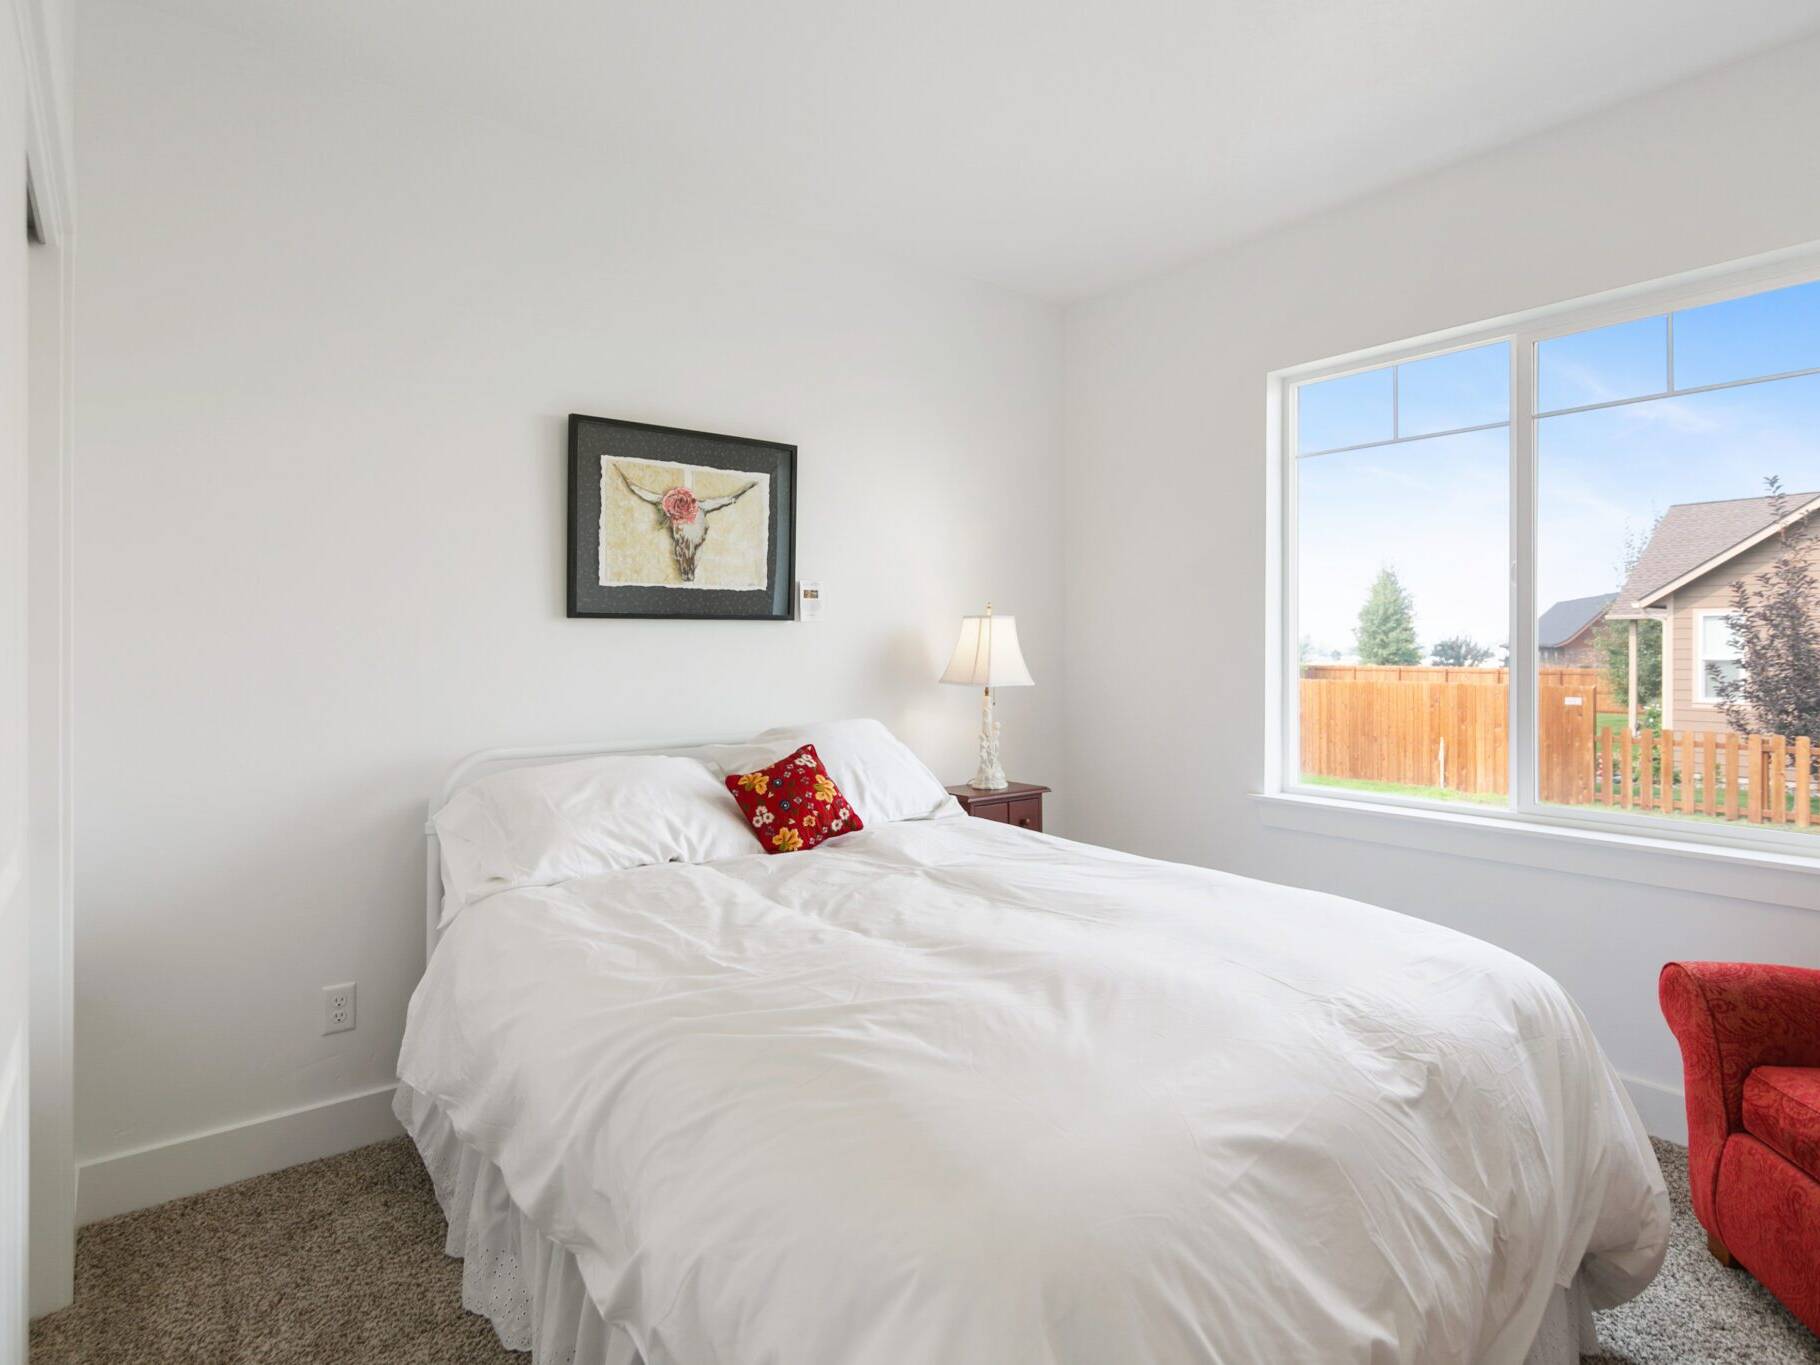 Guest bedroom in The Seeley model home - Built by Big Sky Builder in Hamilton, MT